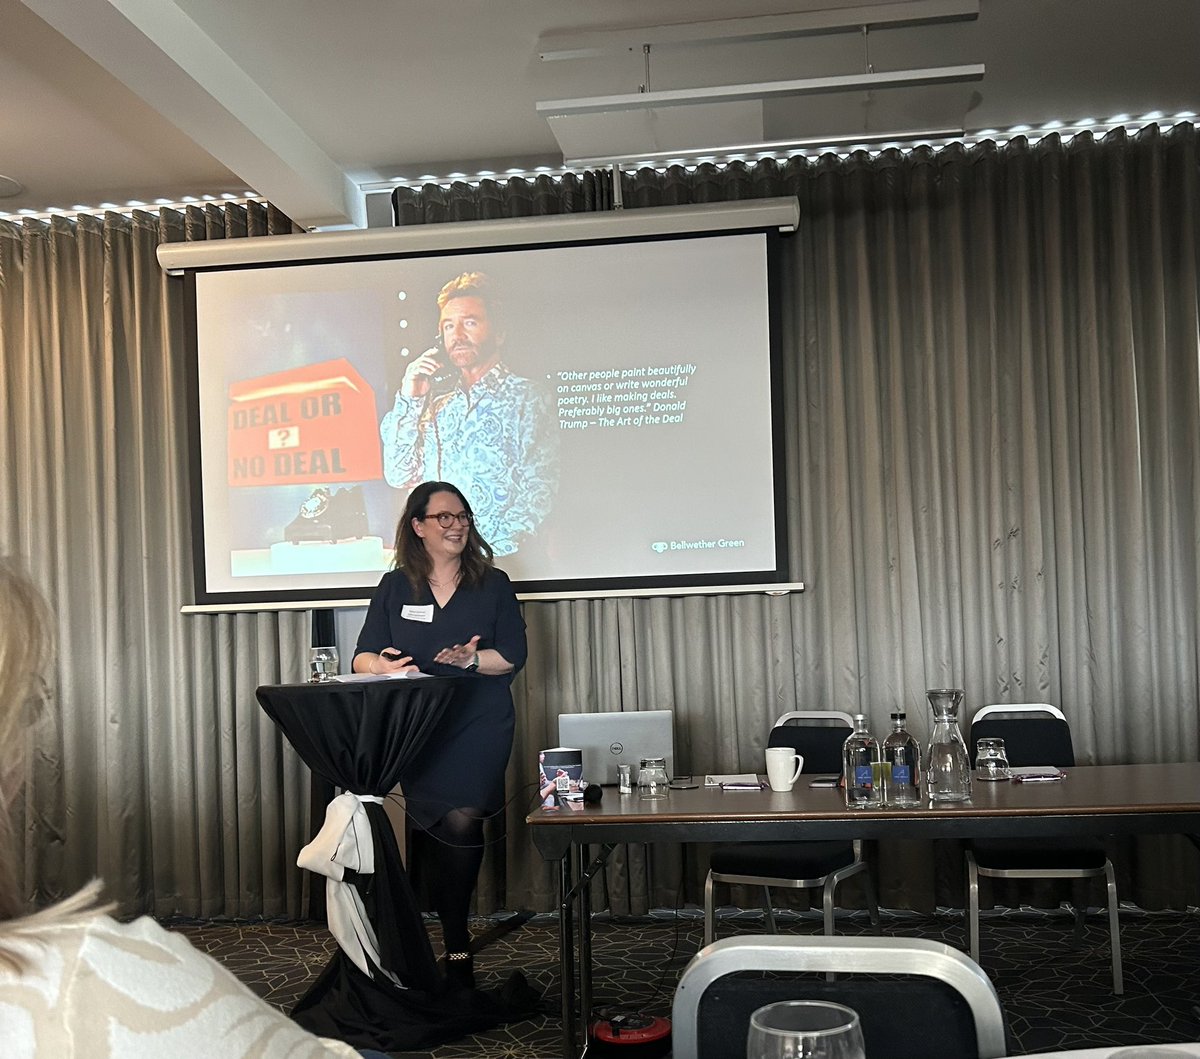 Marianne presents “After the Deal” at the #ELGConf Photo: Top to bottom: Noel Edmonds, Marianne McJannett** **Mr Blobby notably absent from the photo